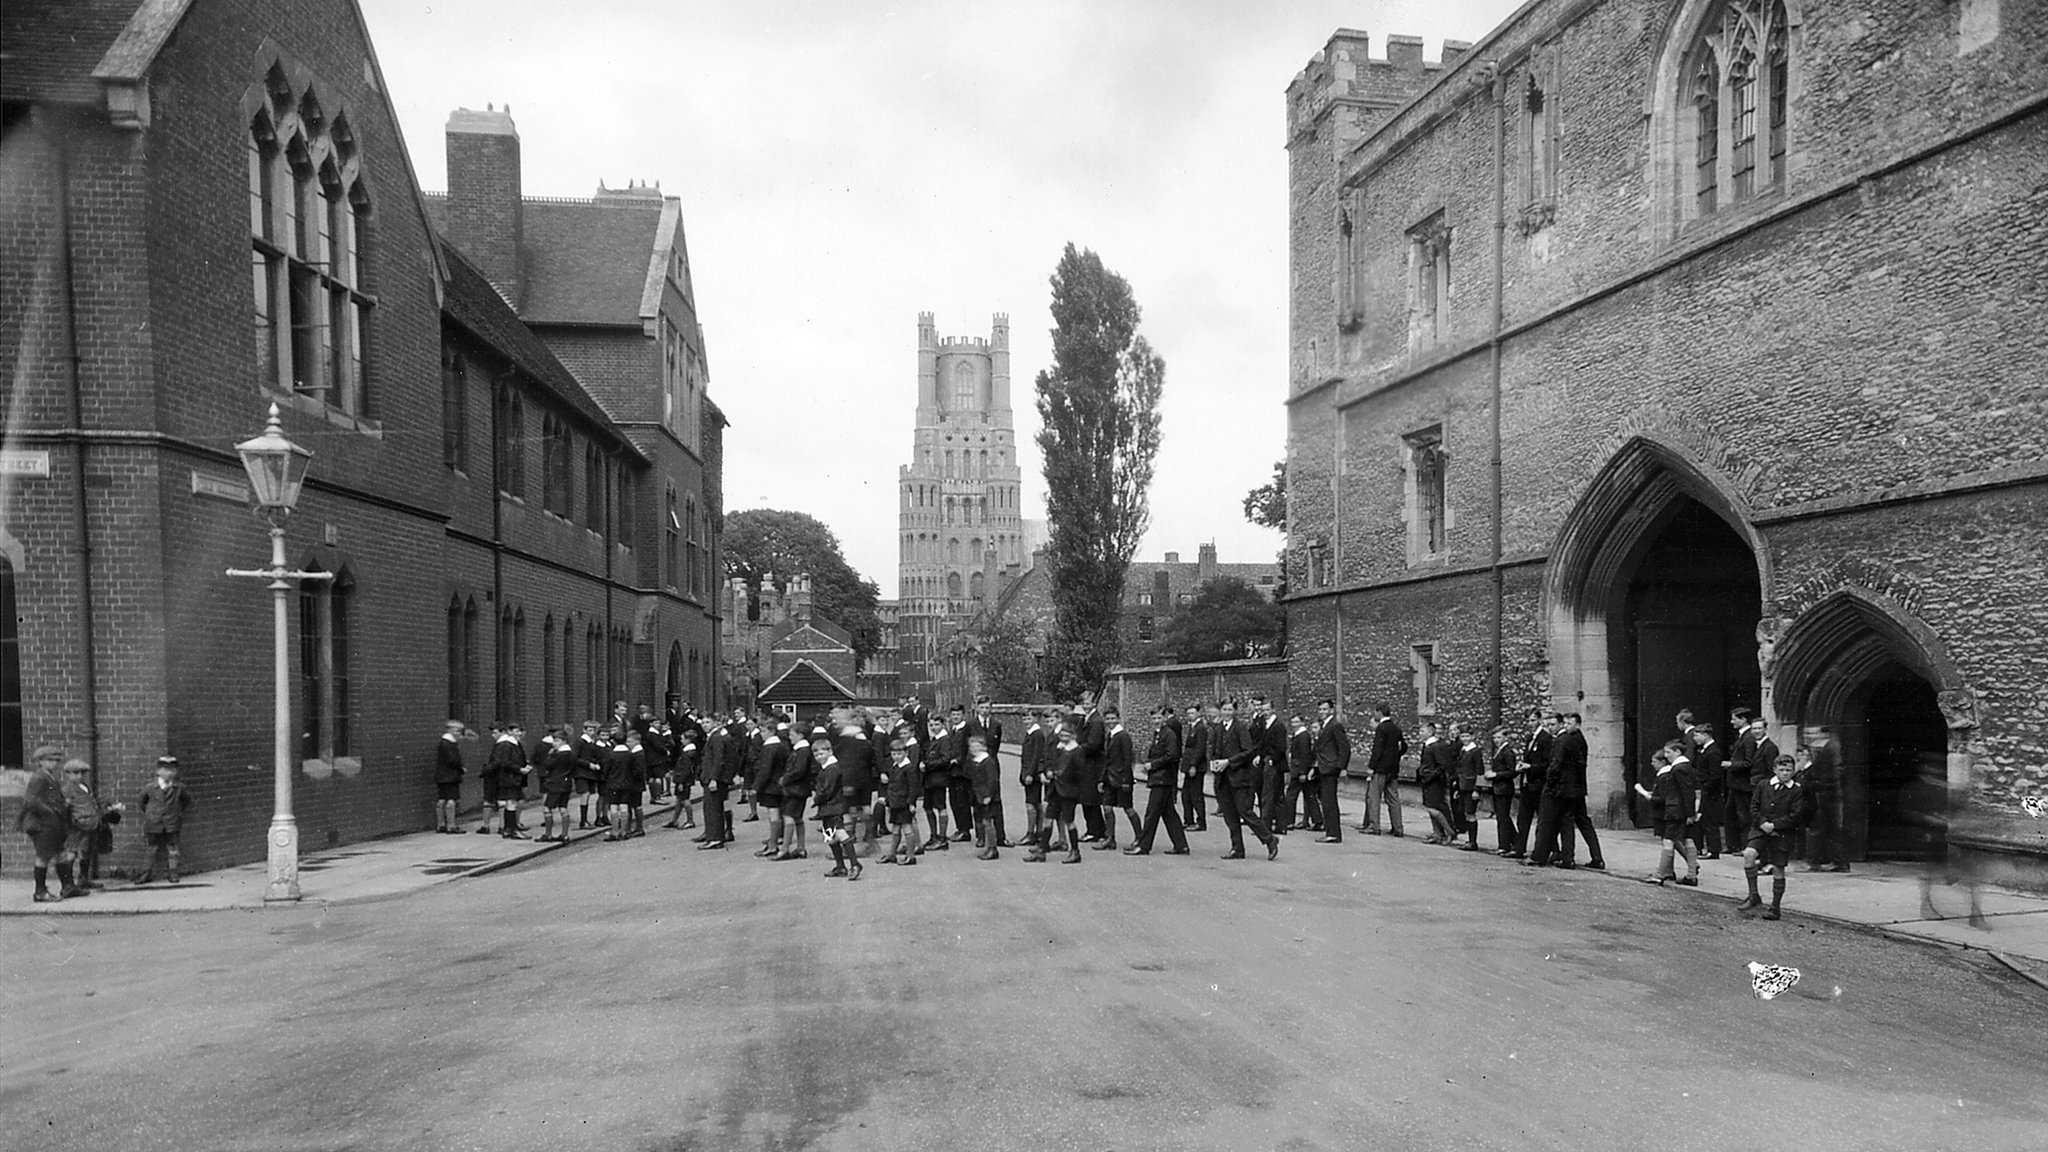 Archive black and white photograph of a group of schoolboys in the street between a brick building and a flint and stone medieval gatehouse, with a church tower in the background.